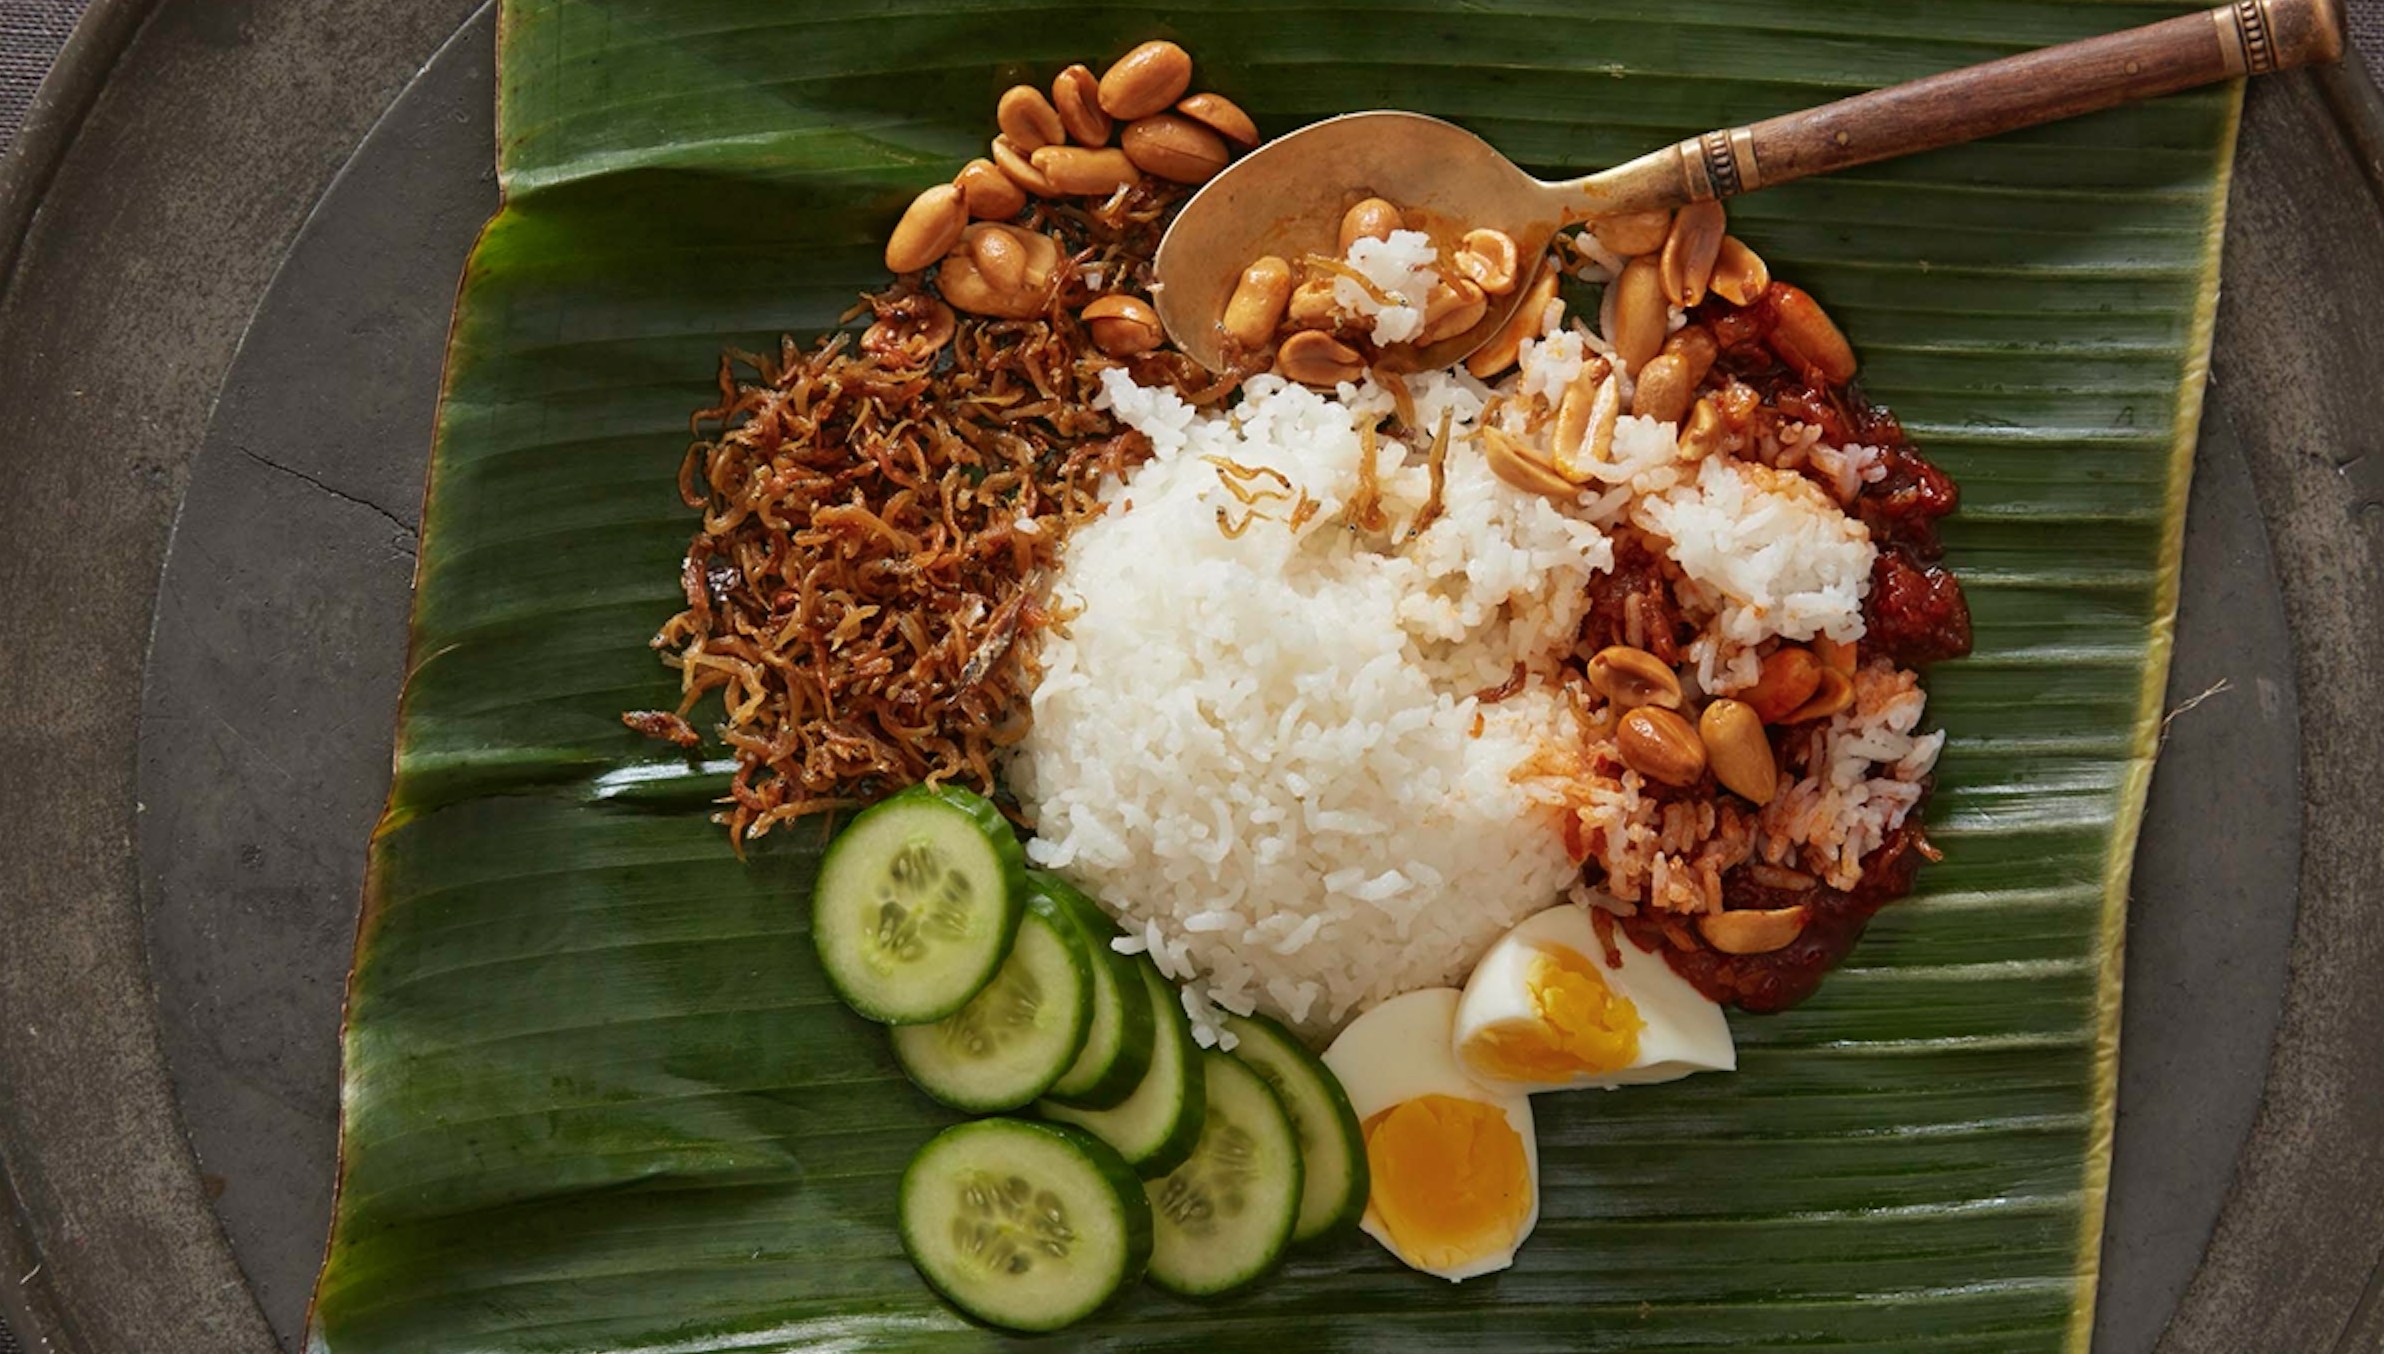 15 Of The Best Malaysian Foods That Will Captivate Your Senses